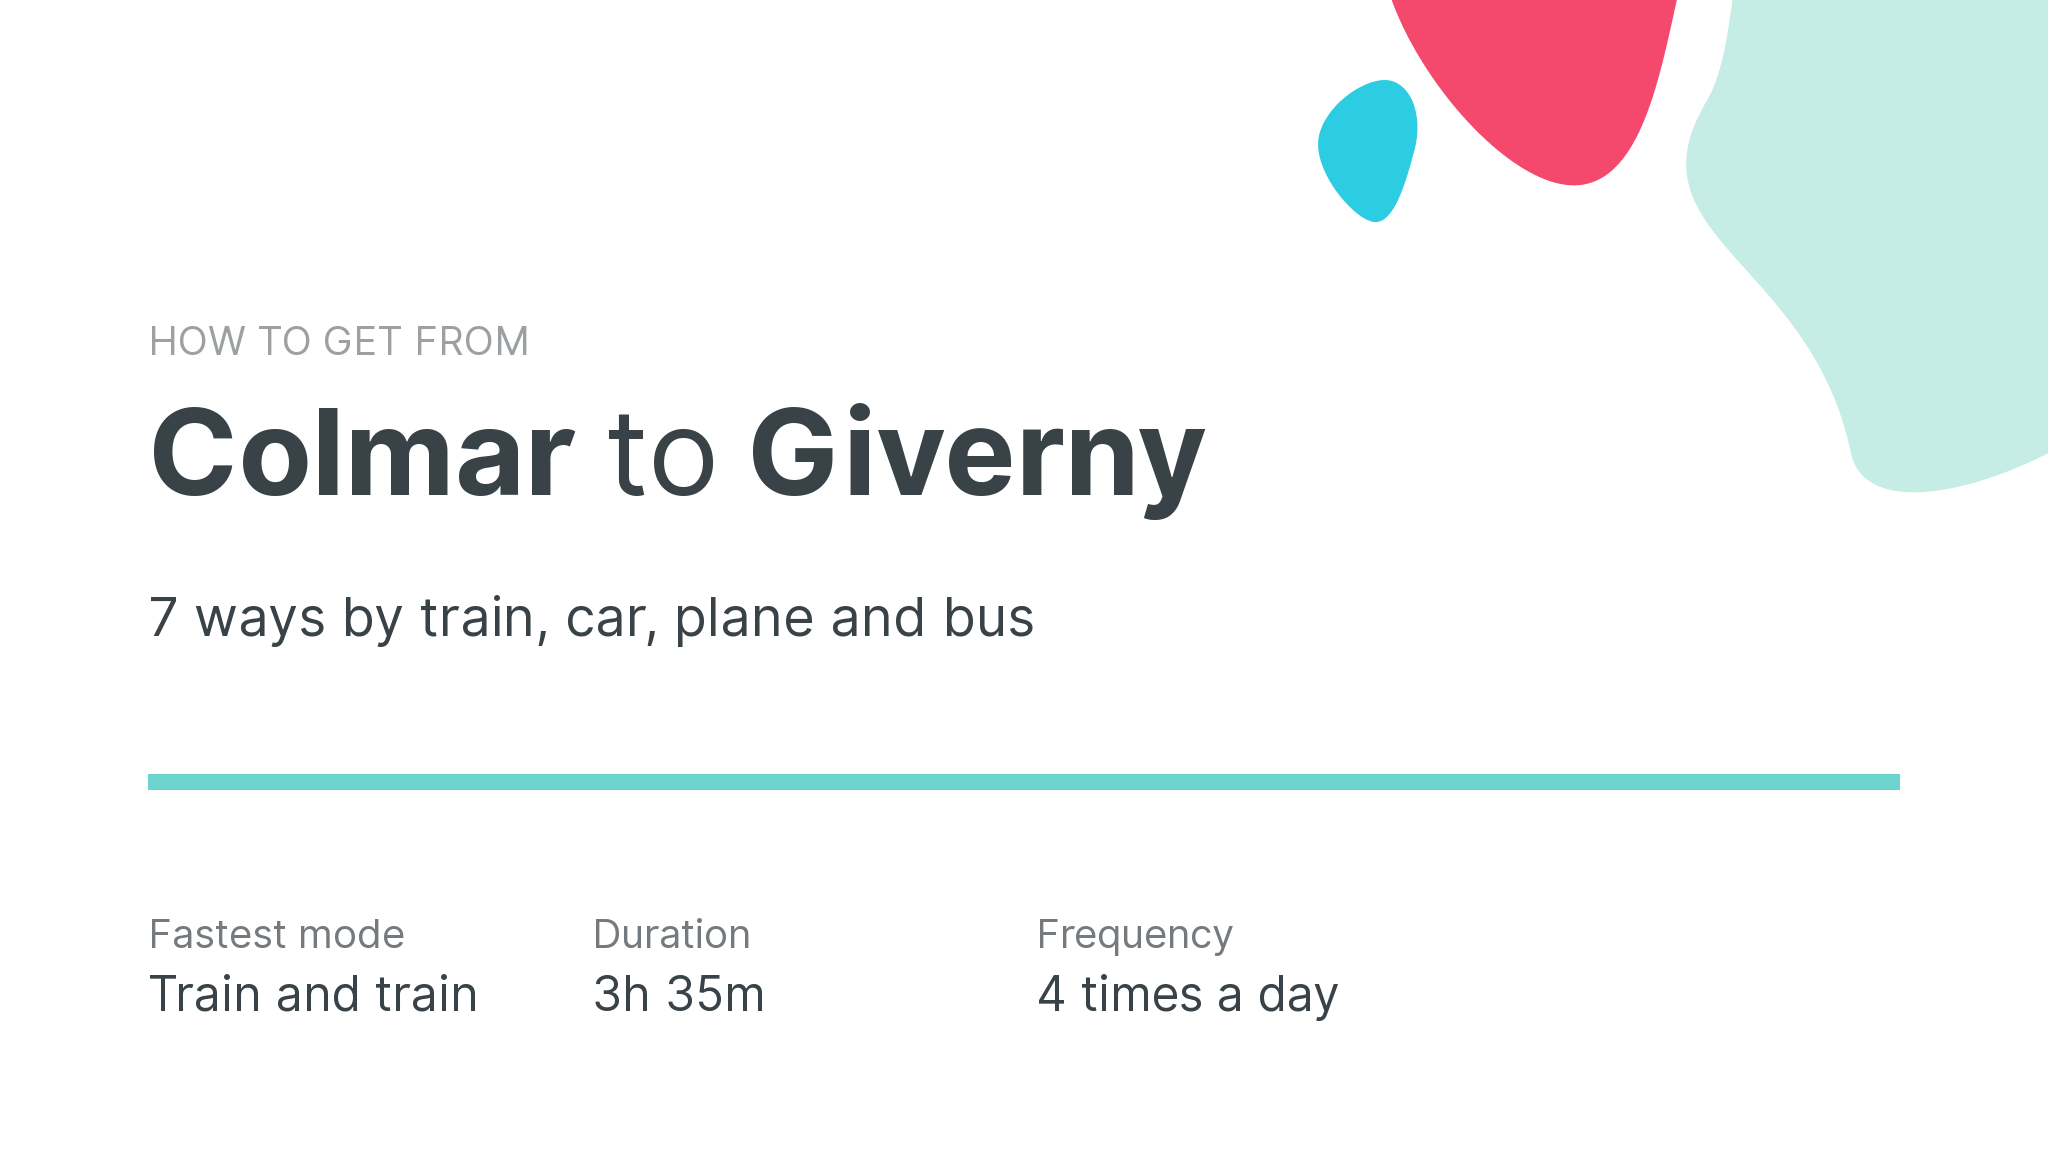 How do I get from Colmar to Giverny